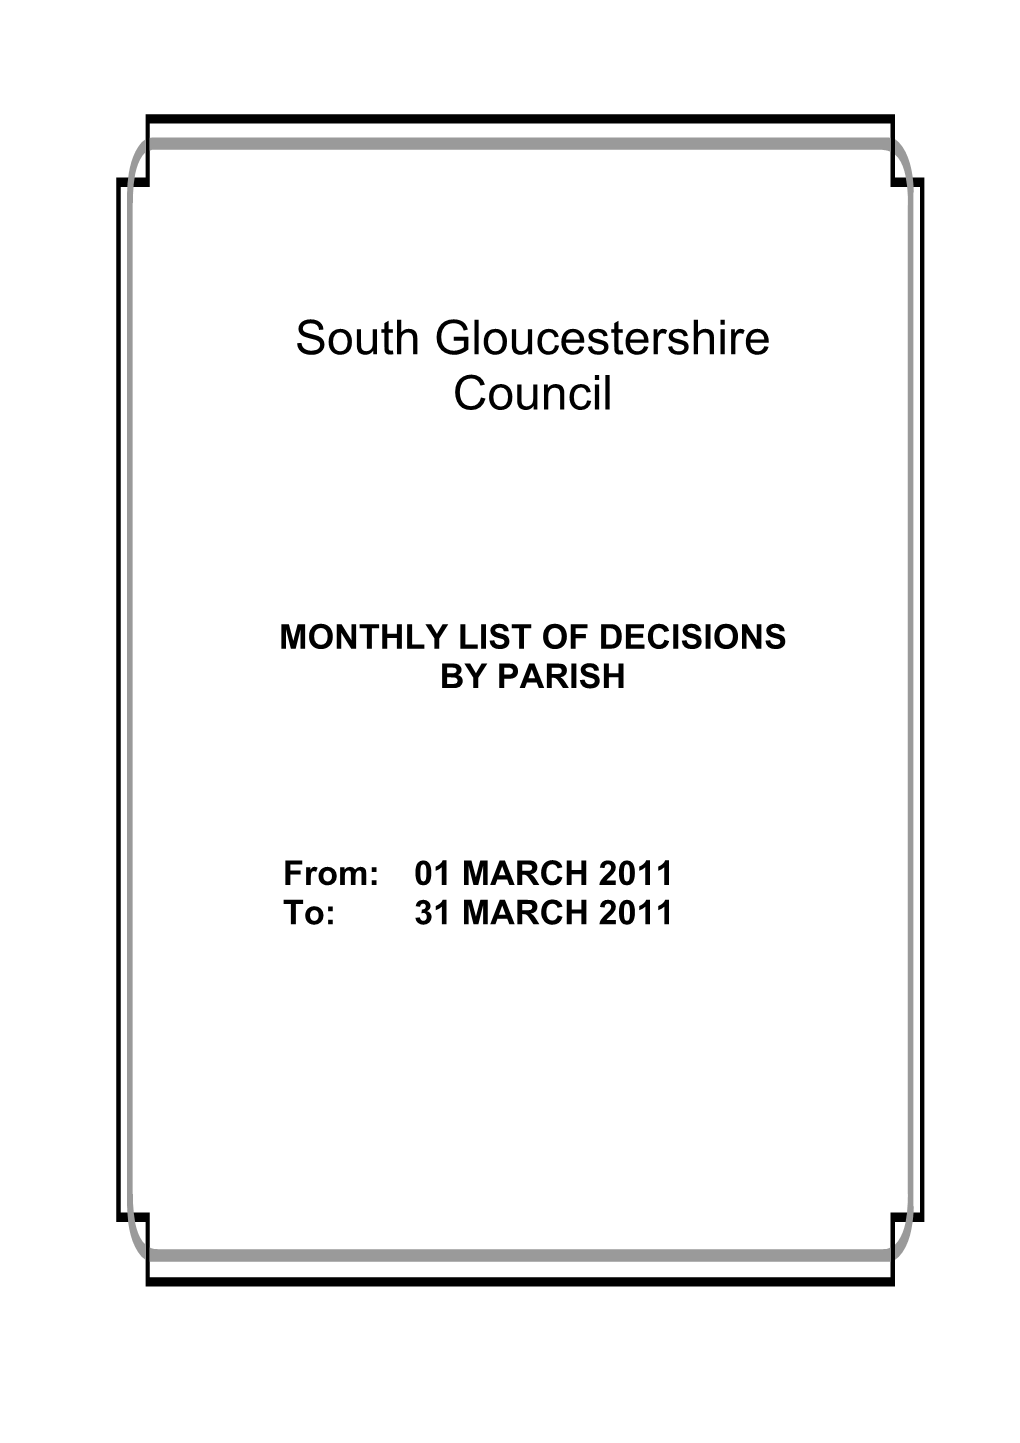 MONTHLY LIST of DECISIONS by PARISH From: 01 MARCH 2011 To